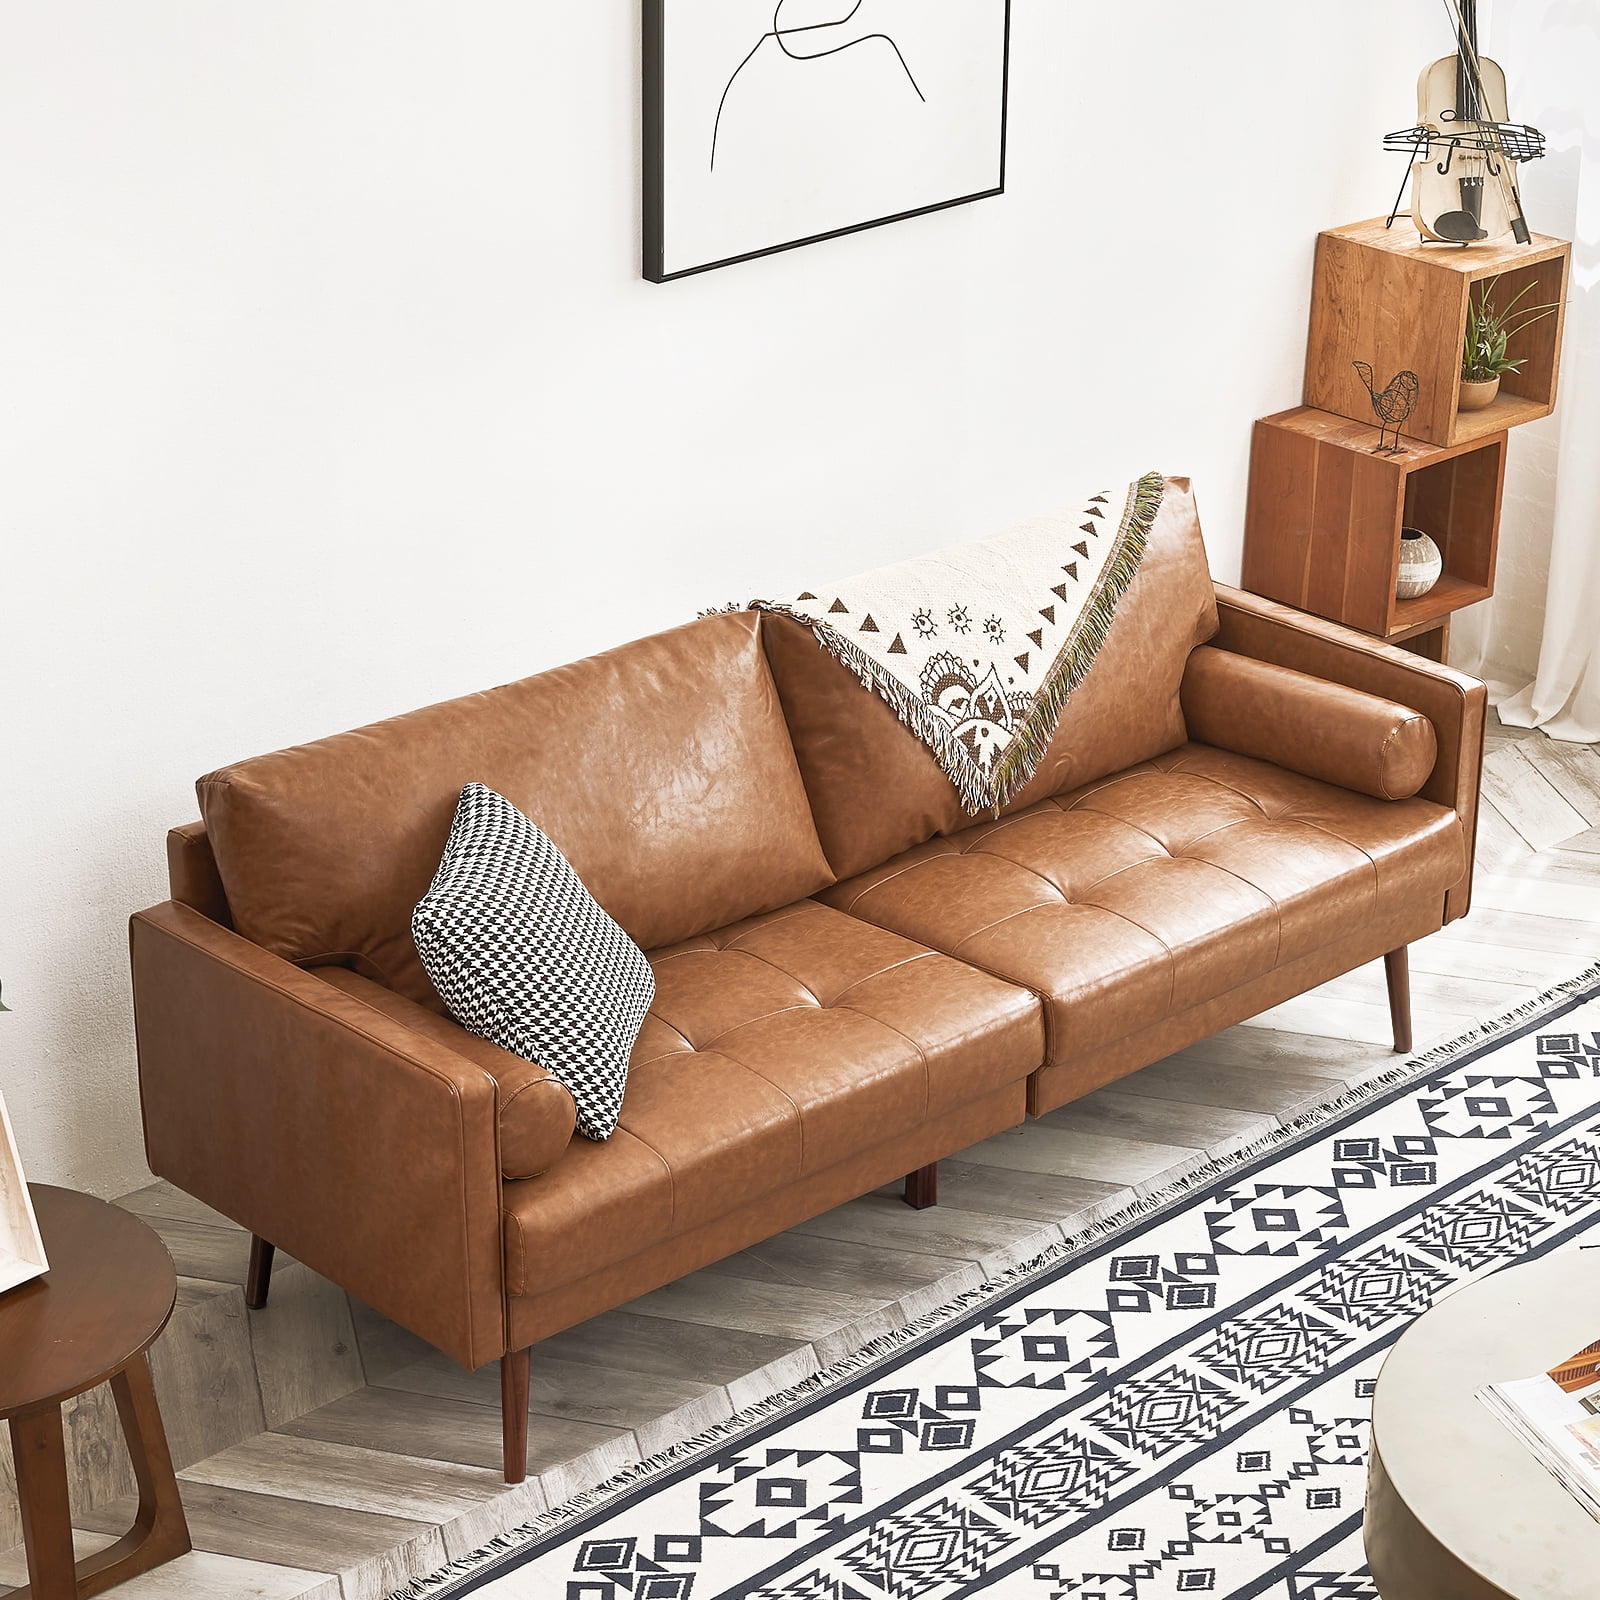 Busk bønner Tomat Vonanda Faux Leather Sofa Couch, Mid-Century 73 inch 3-Seater Sofa with 2  Bolster Pillows and Hand-Stitched Cushion for Living Room, Caramel -  Walmart.com